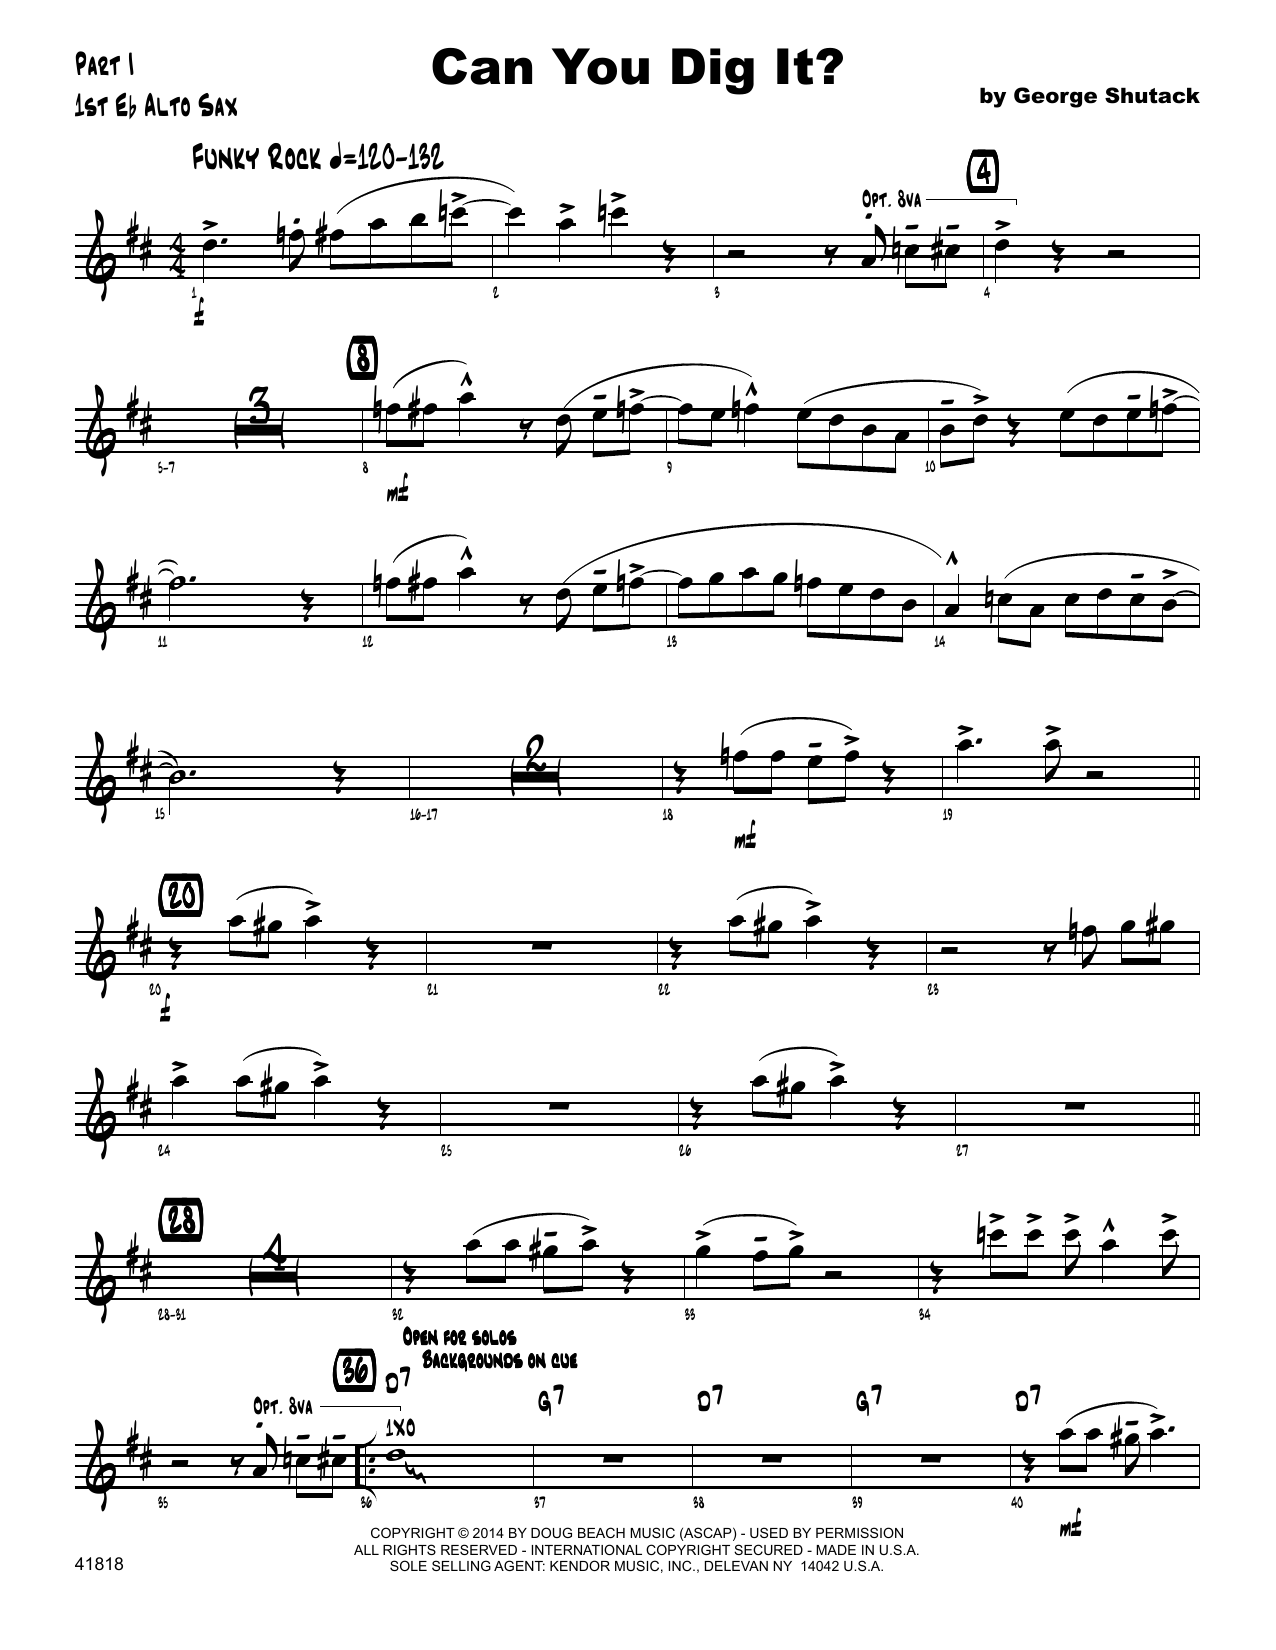 Download George Shutack Can You Dig It? - 1st Eb Alto Saxophone Sheet Music